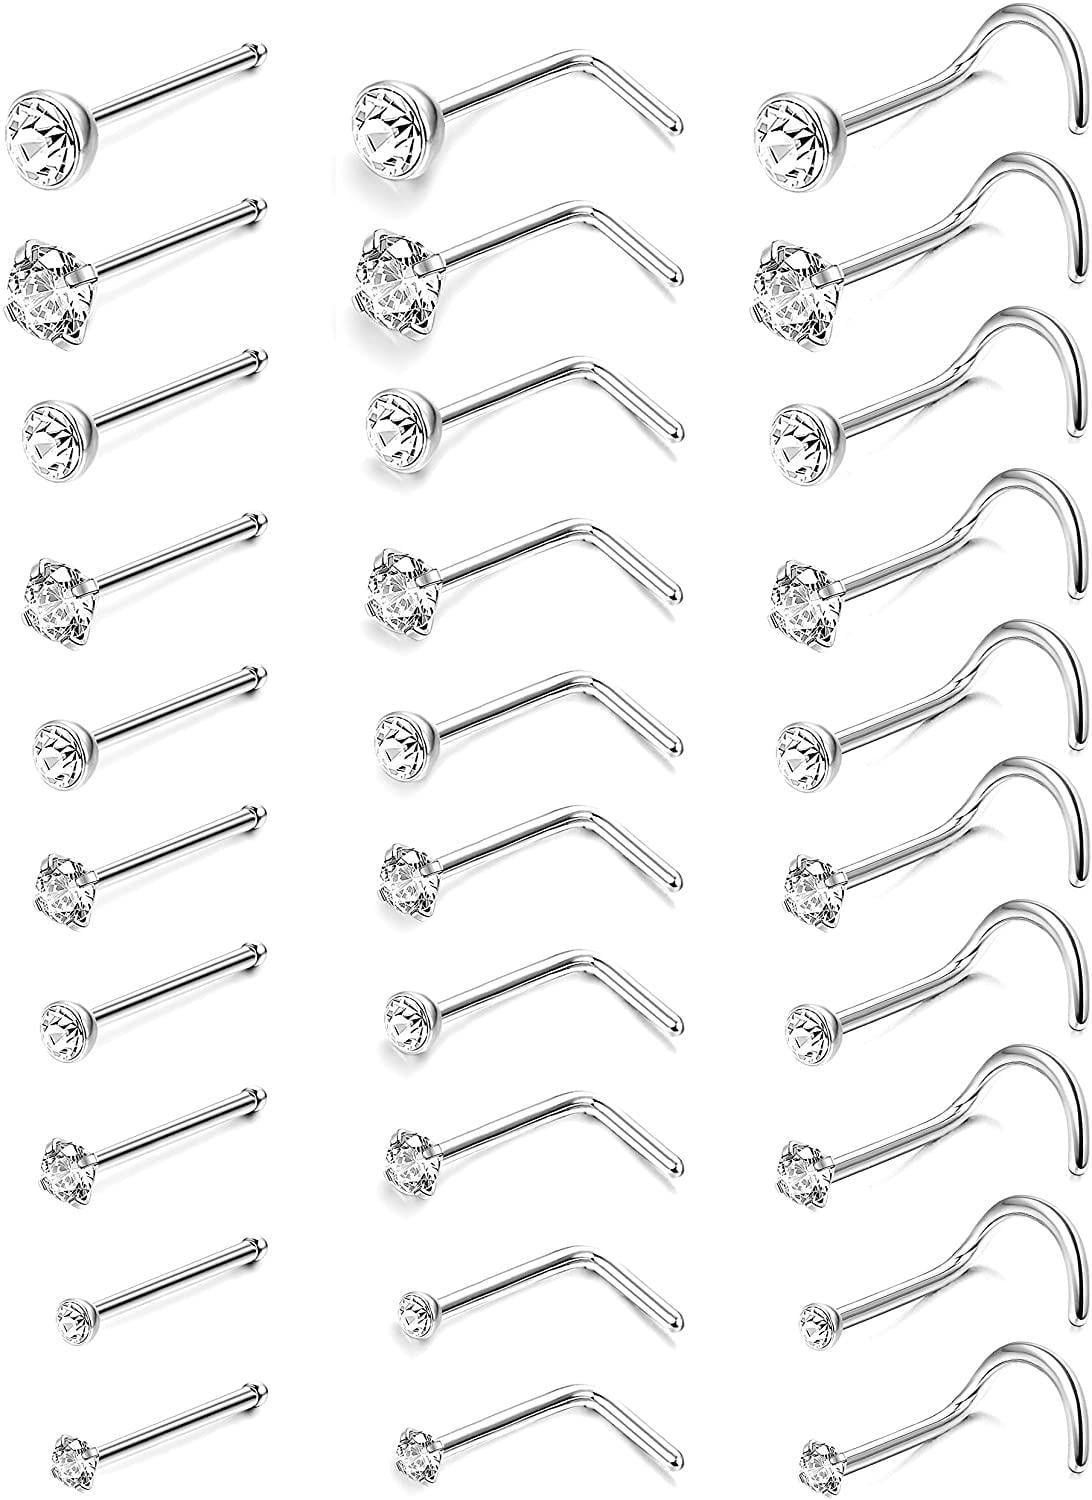 Kridzisw 30Pcs Nose Ring Studs for Women Surgical Steel Nostril Bone Pin Crystals Body Piercing Jewelry Screw L Shape 18G CZ 1.5MM 2MM 2.5MM 3MM 